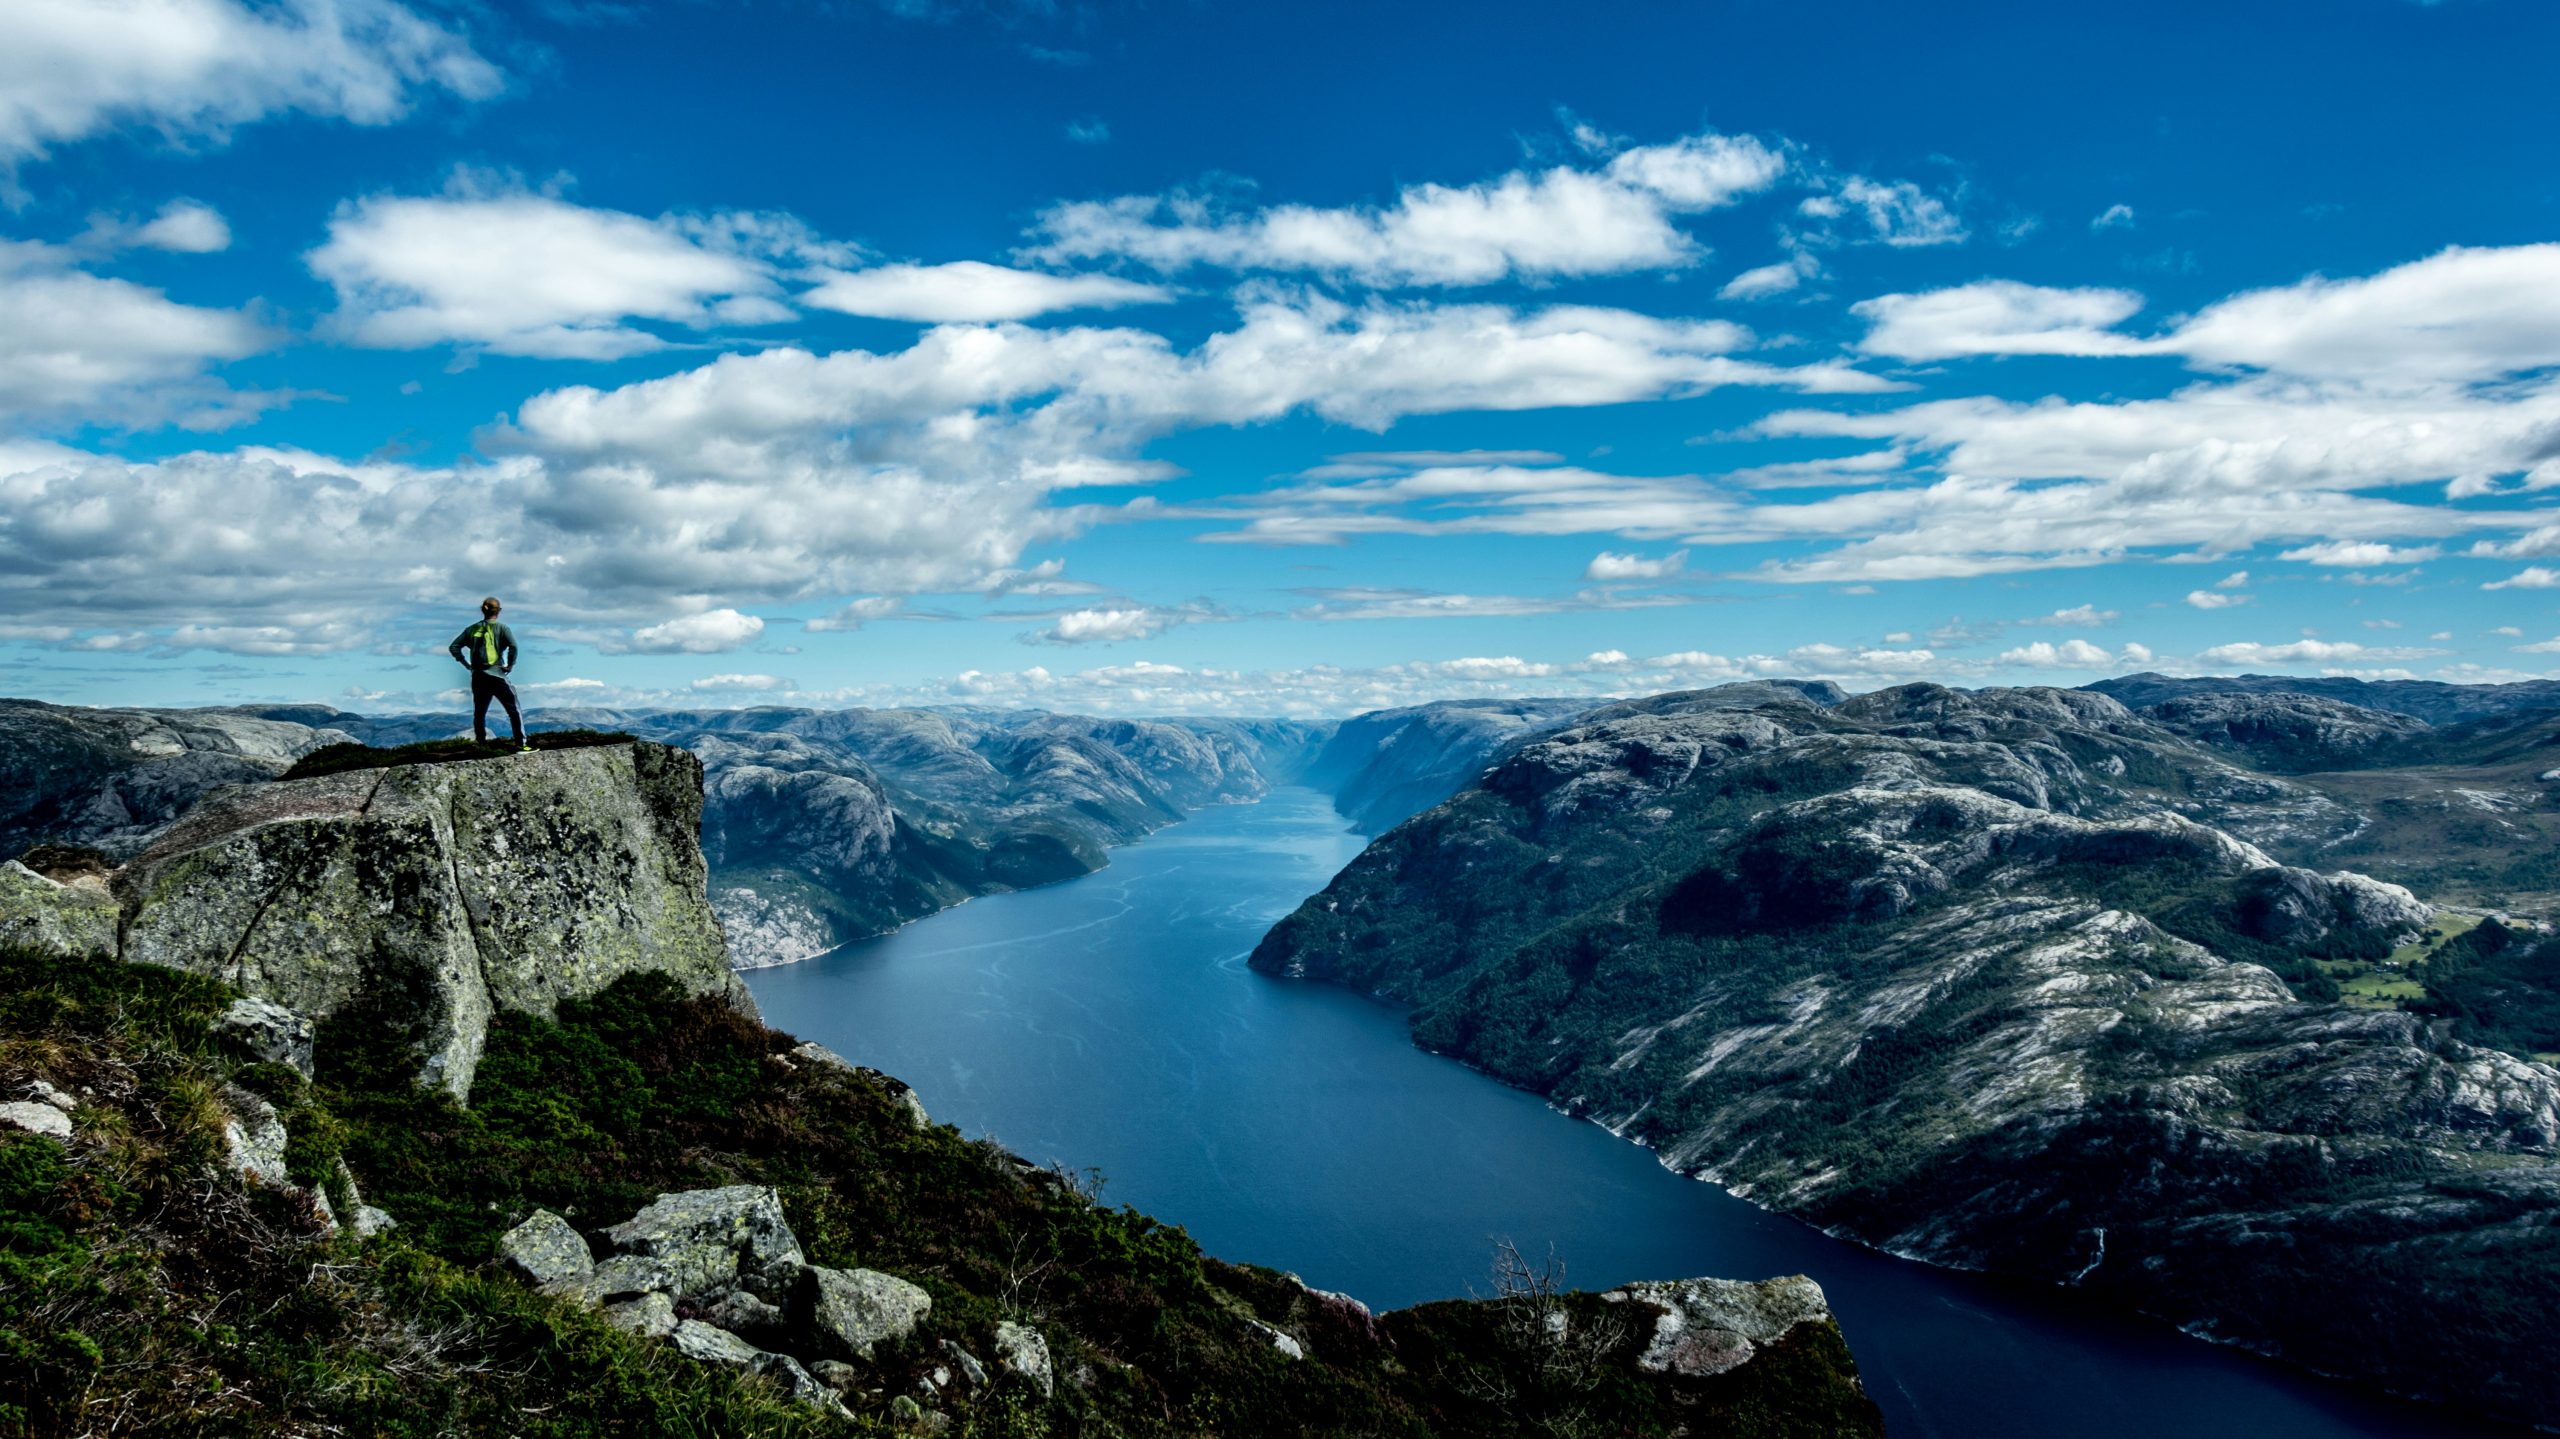 explore the breathtaking natural beauty of norway's fjords, with stunning landscapes and serene waterways waiting to be discovered.